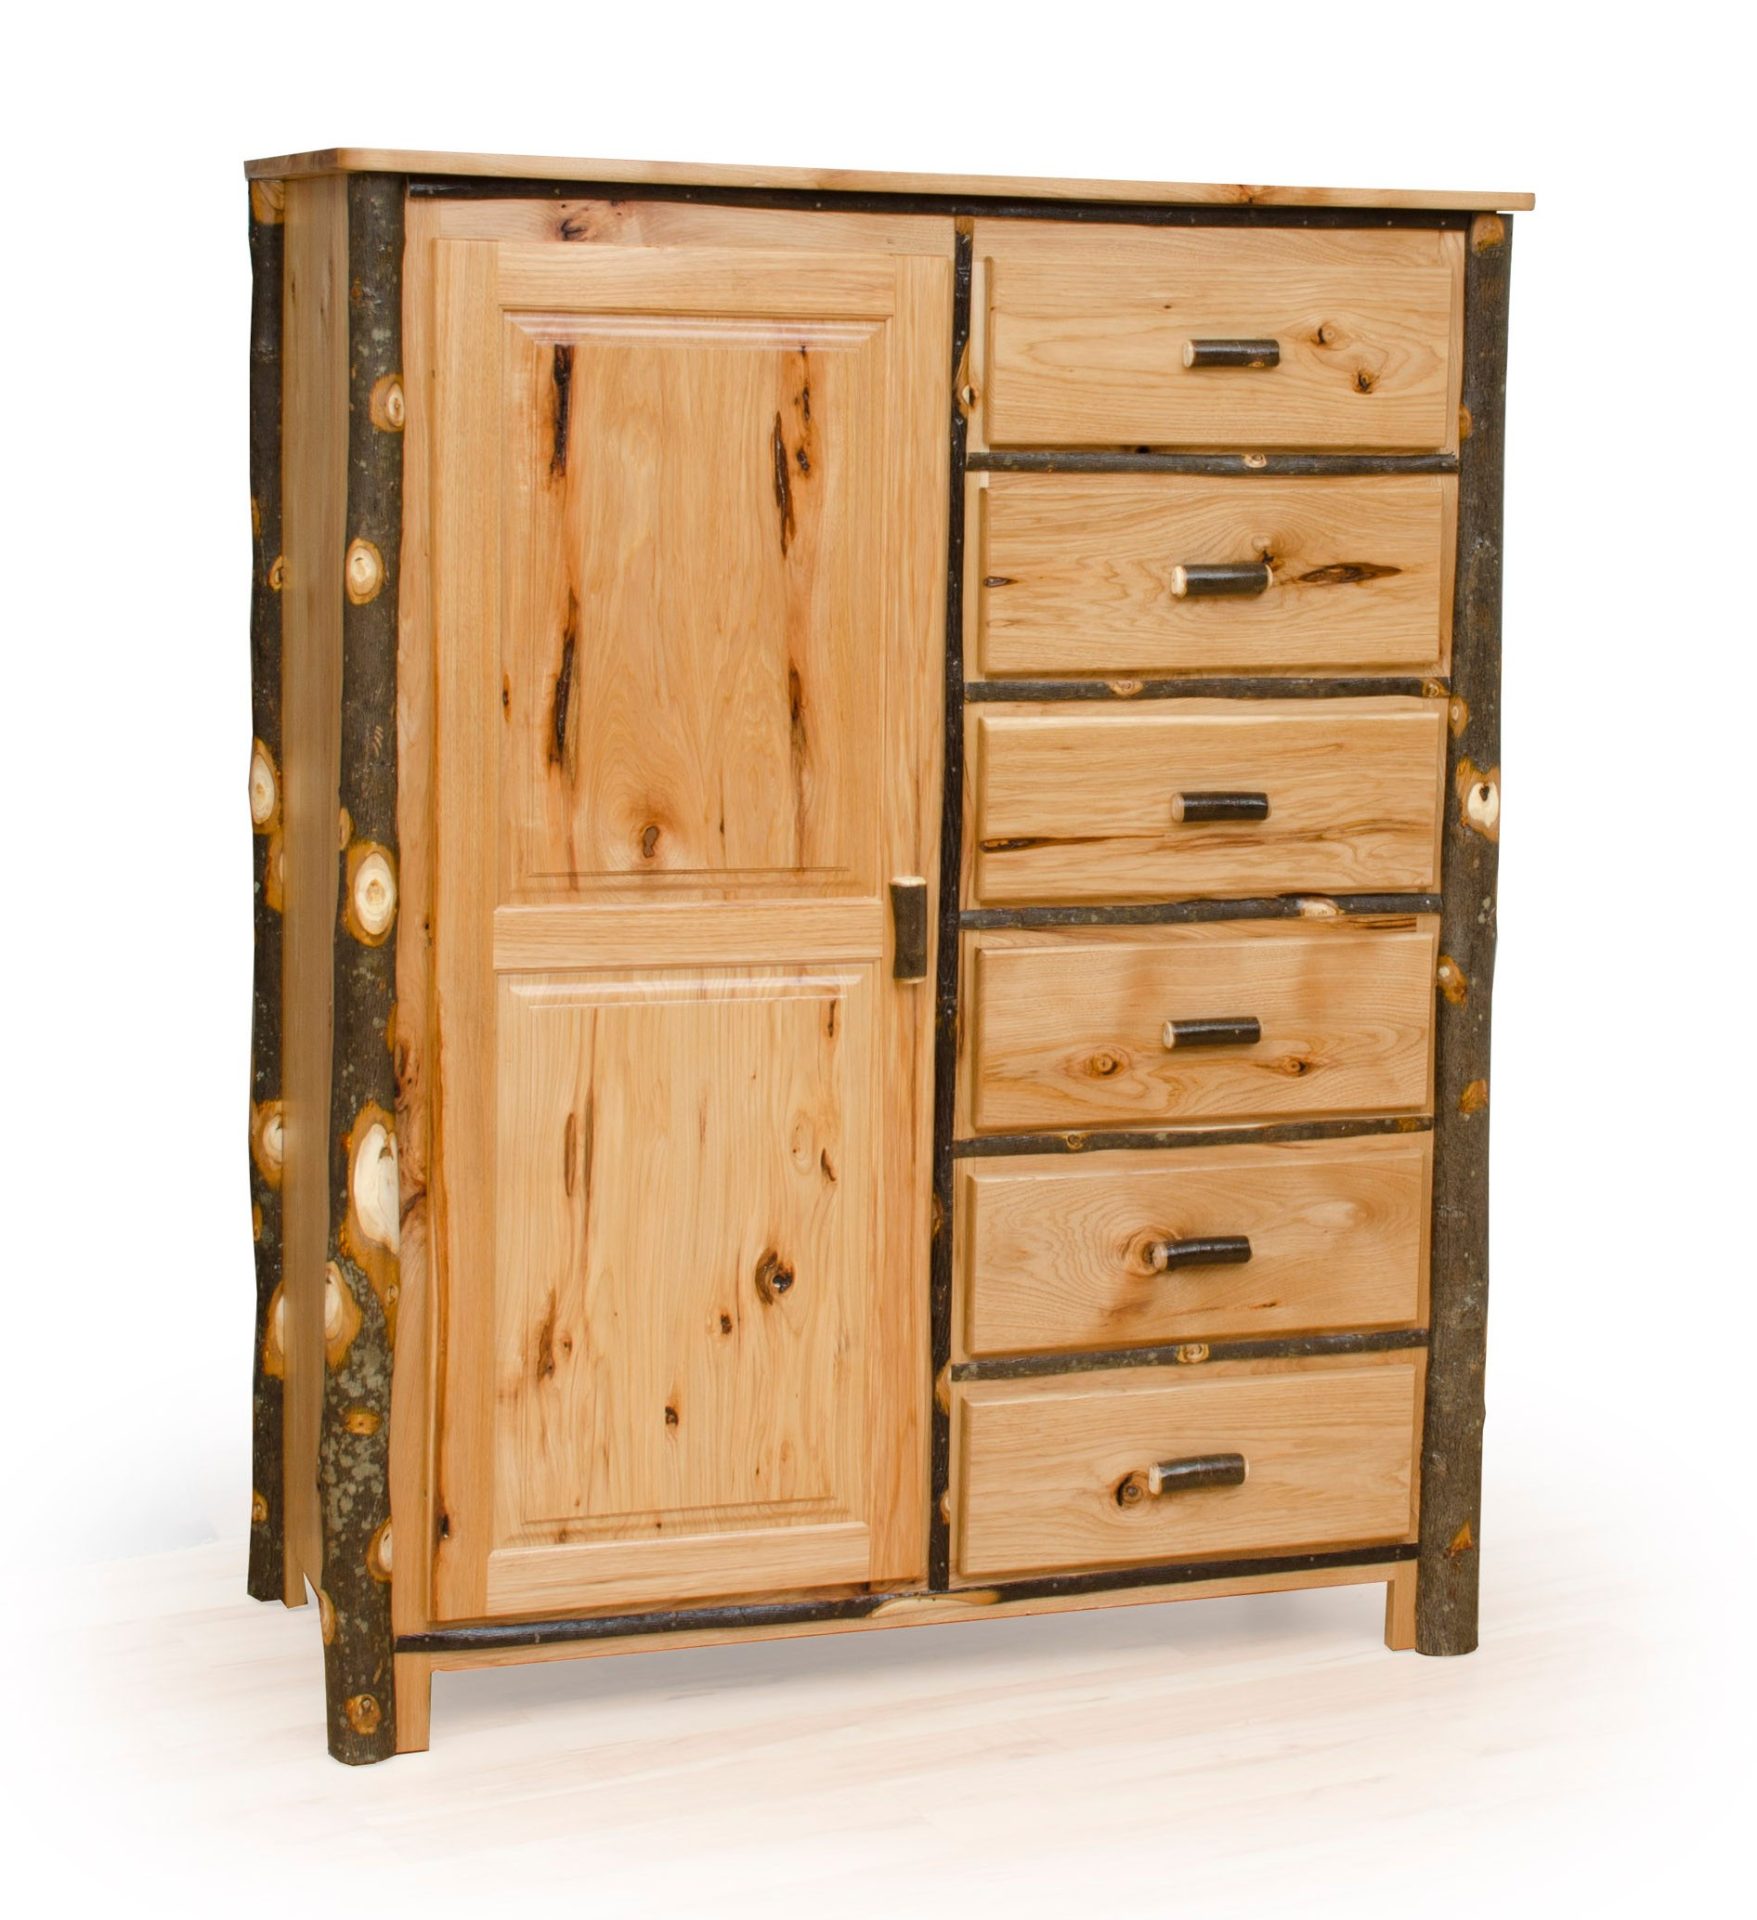 Hickory Log Wardrobe/Armoire with Drawers